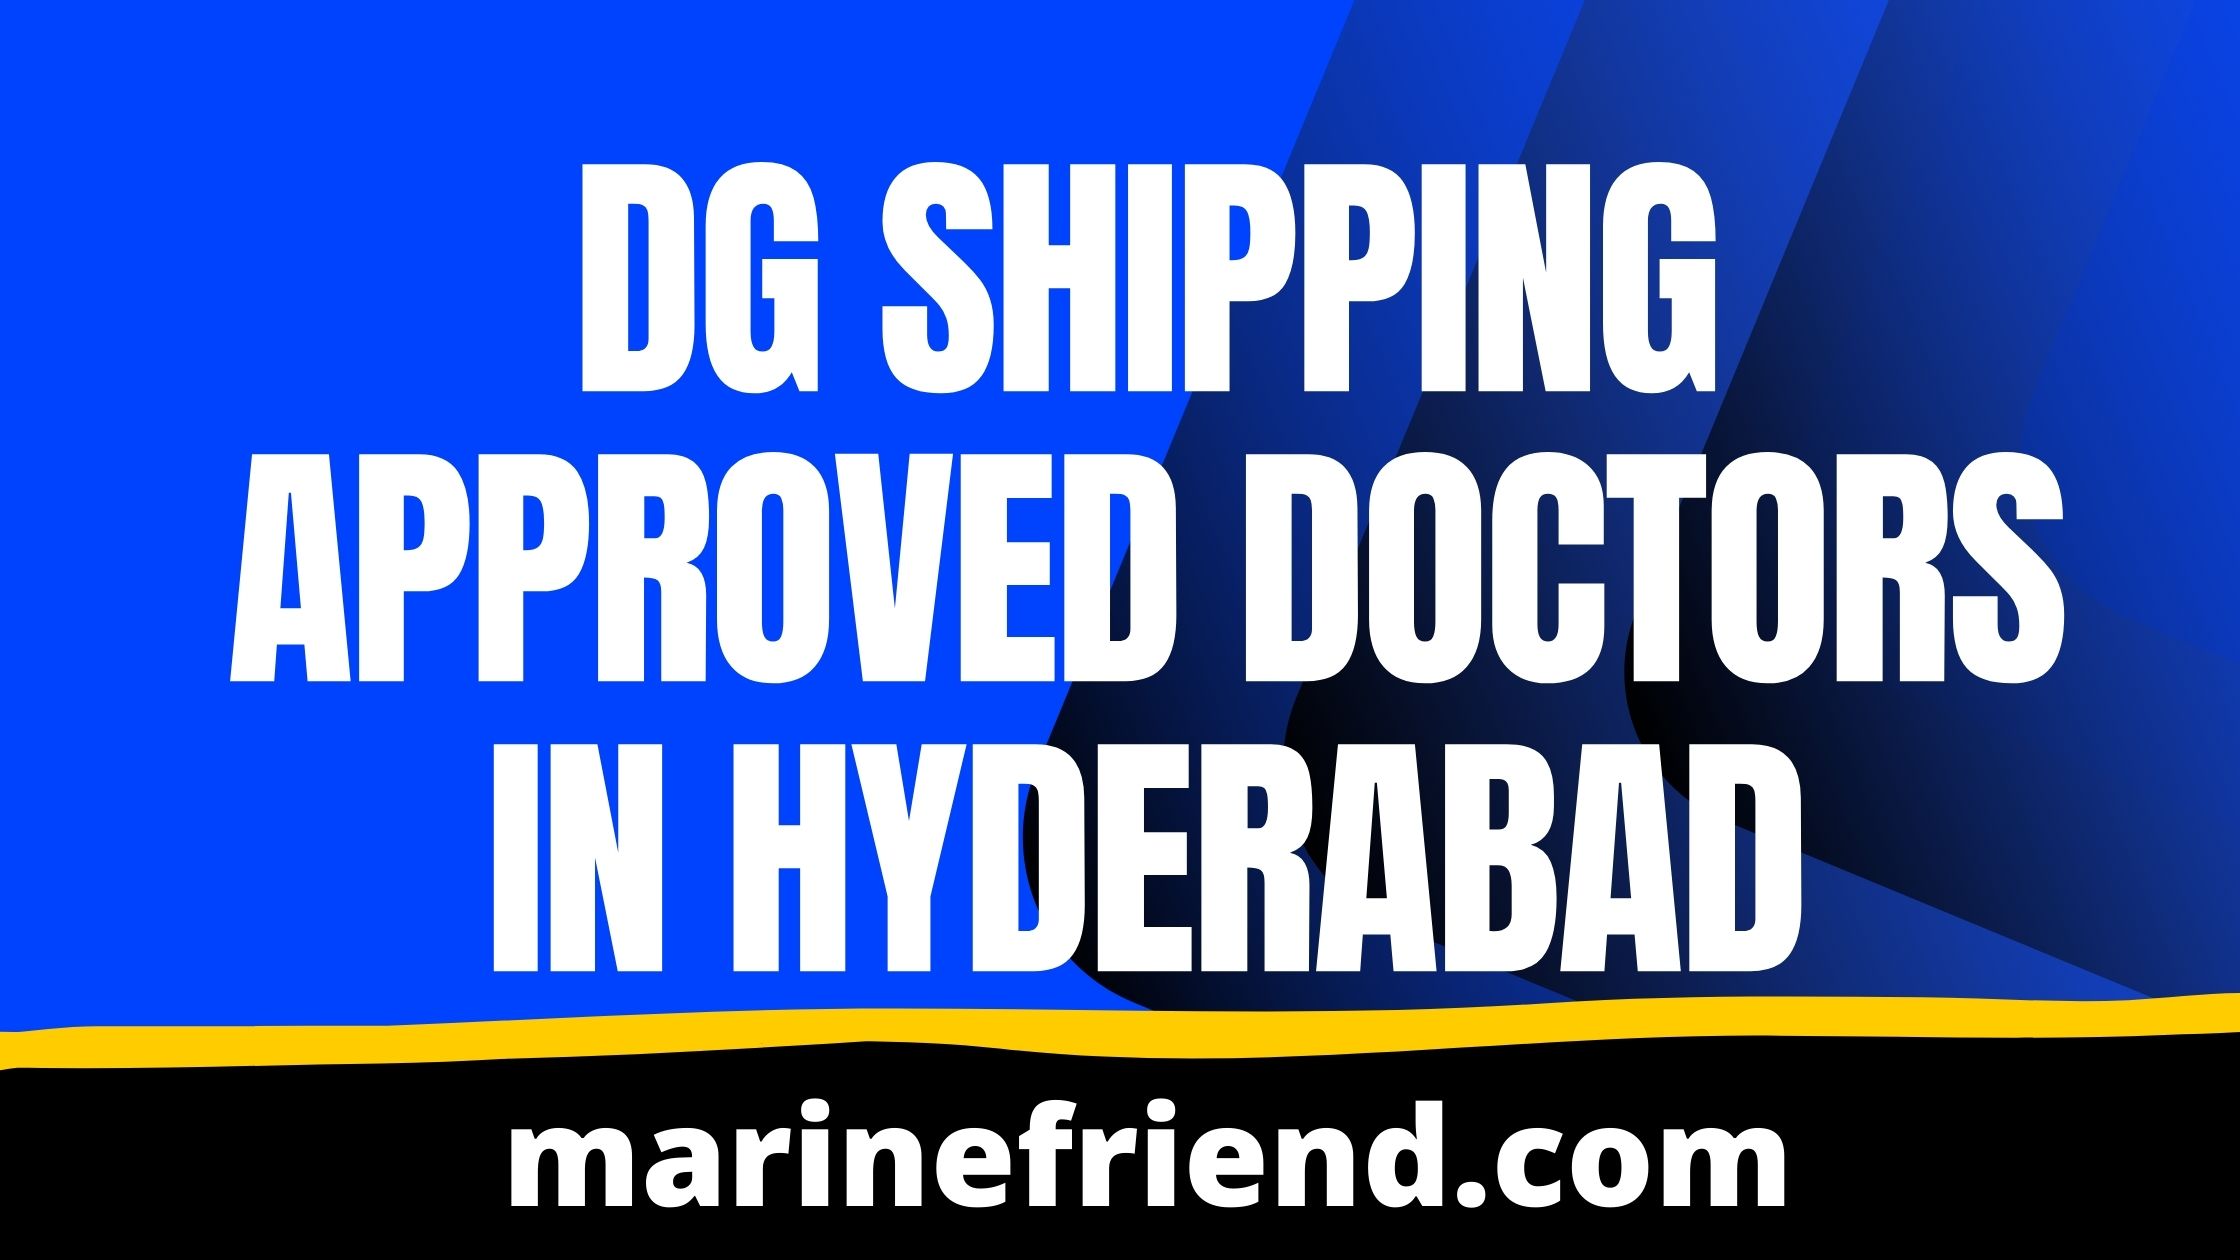 DG Shipping Approved Doctors in Hyderabad